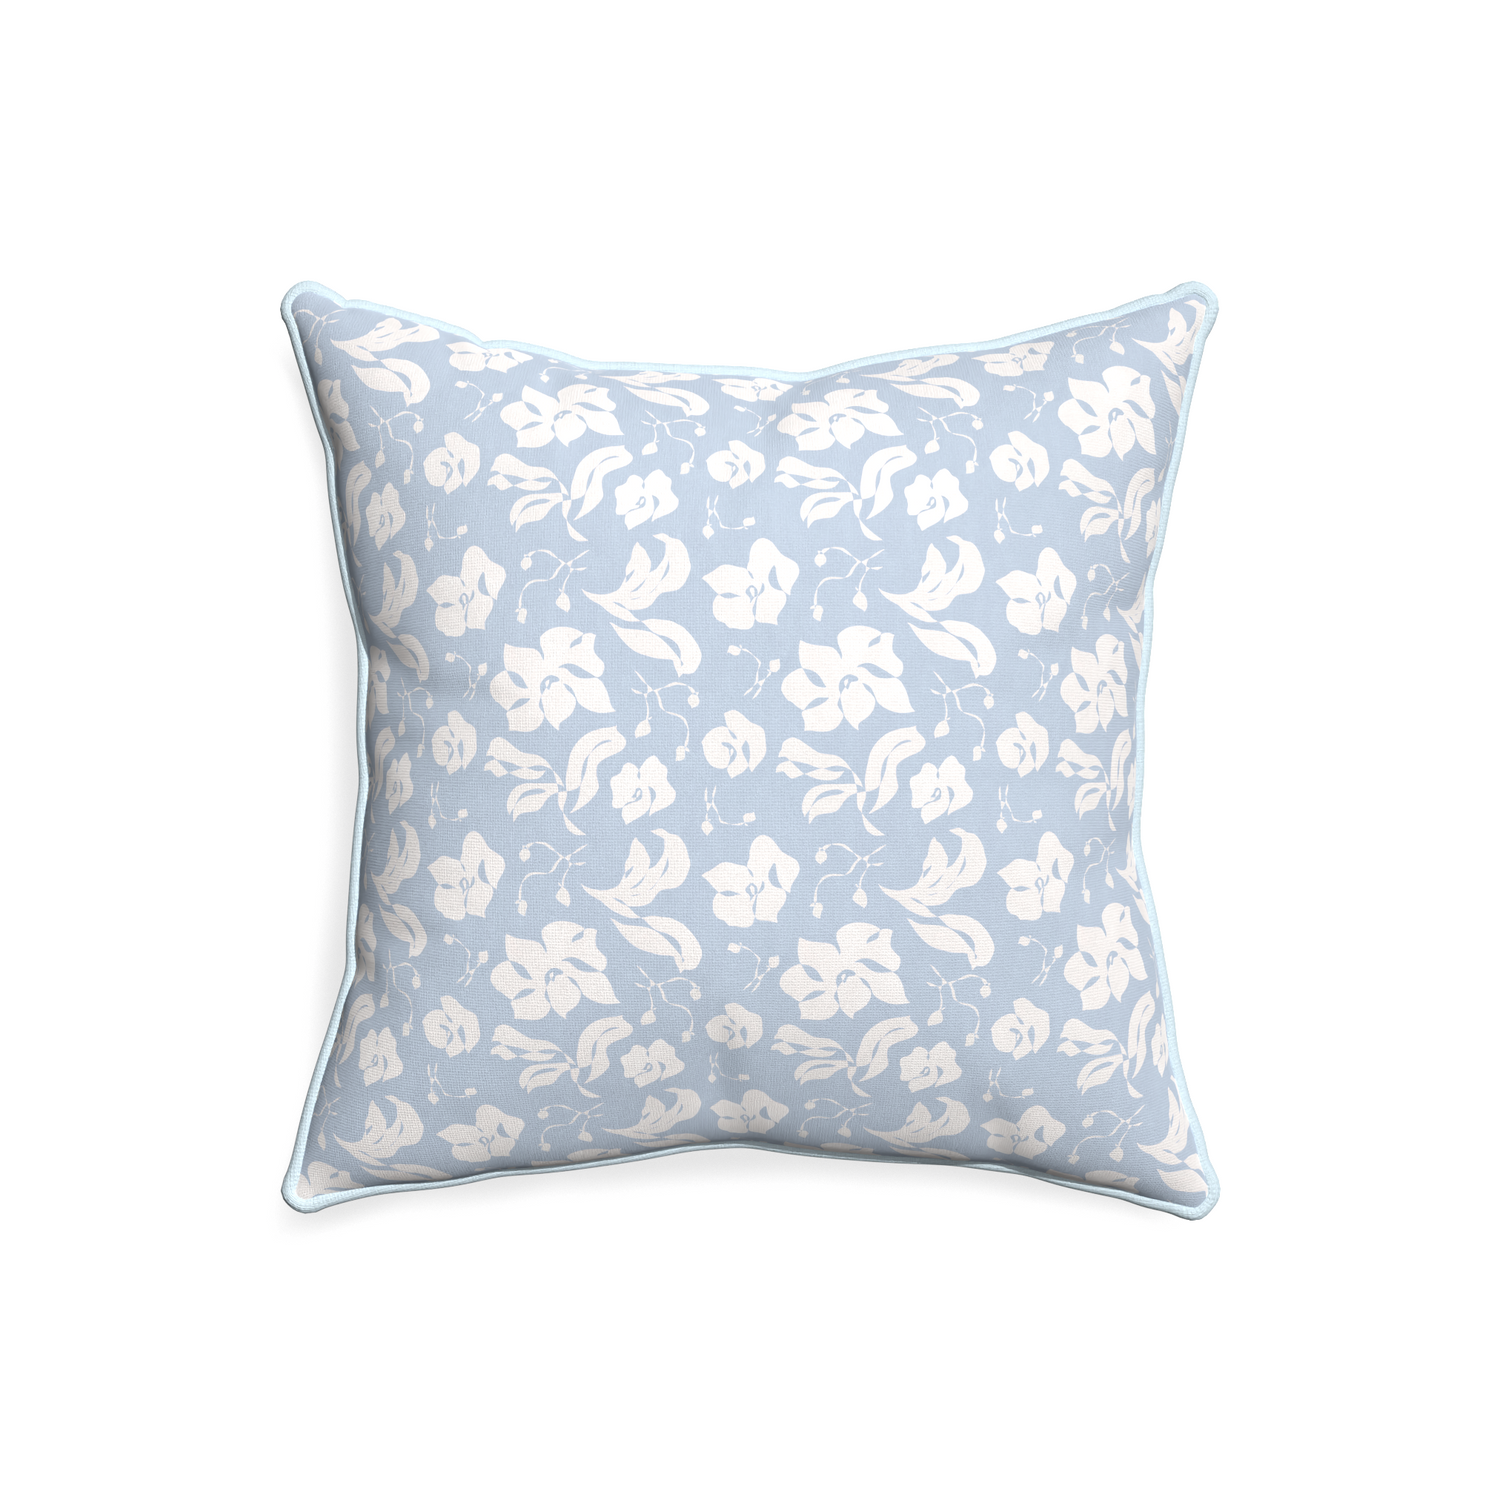 20-square georgia custom cornflower blue floralpillow with powder piping on white background